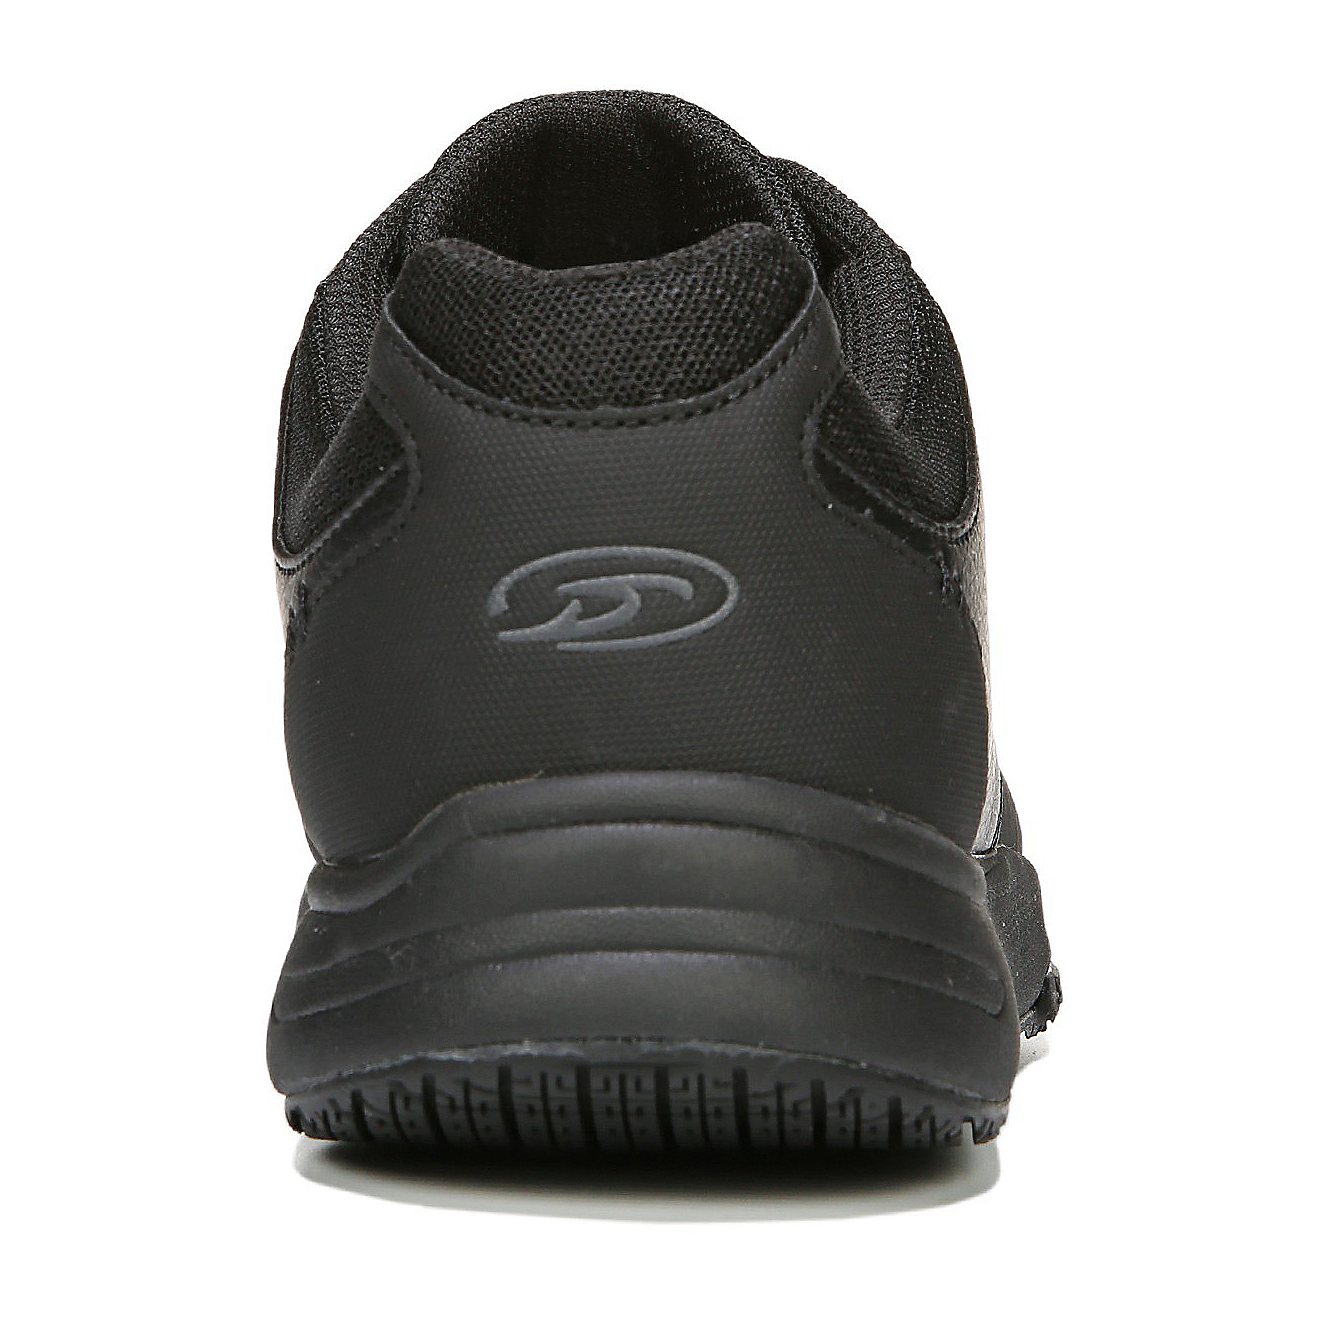 Dr. Scholl's Men's Intrepid Professional Series Slip-Resistant Shoes                                                             - view number 7